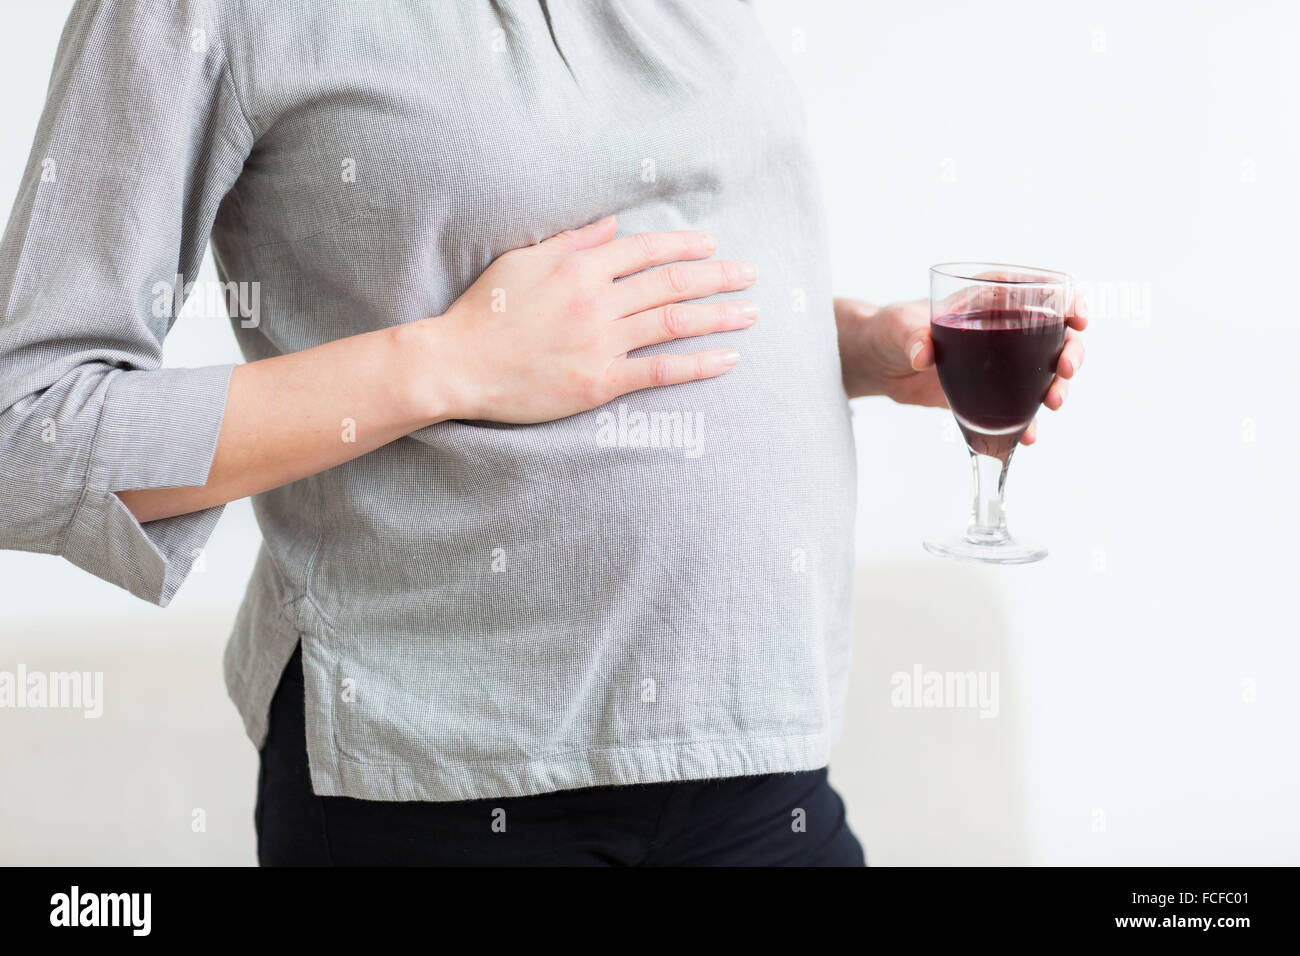 Pregnant woman with a glass of wine. Stock Photo